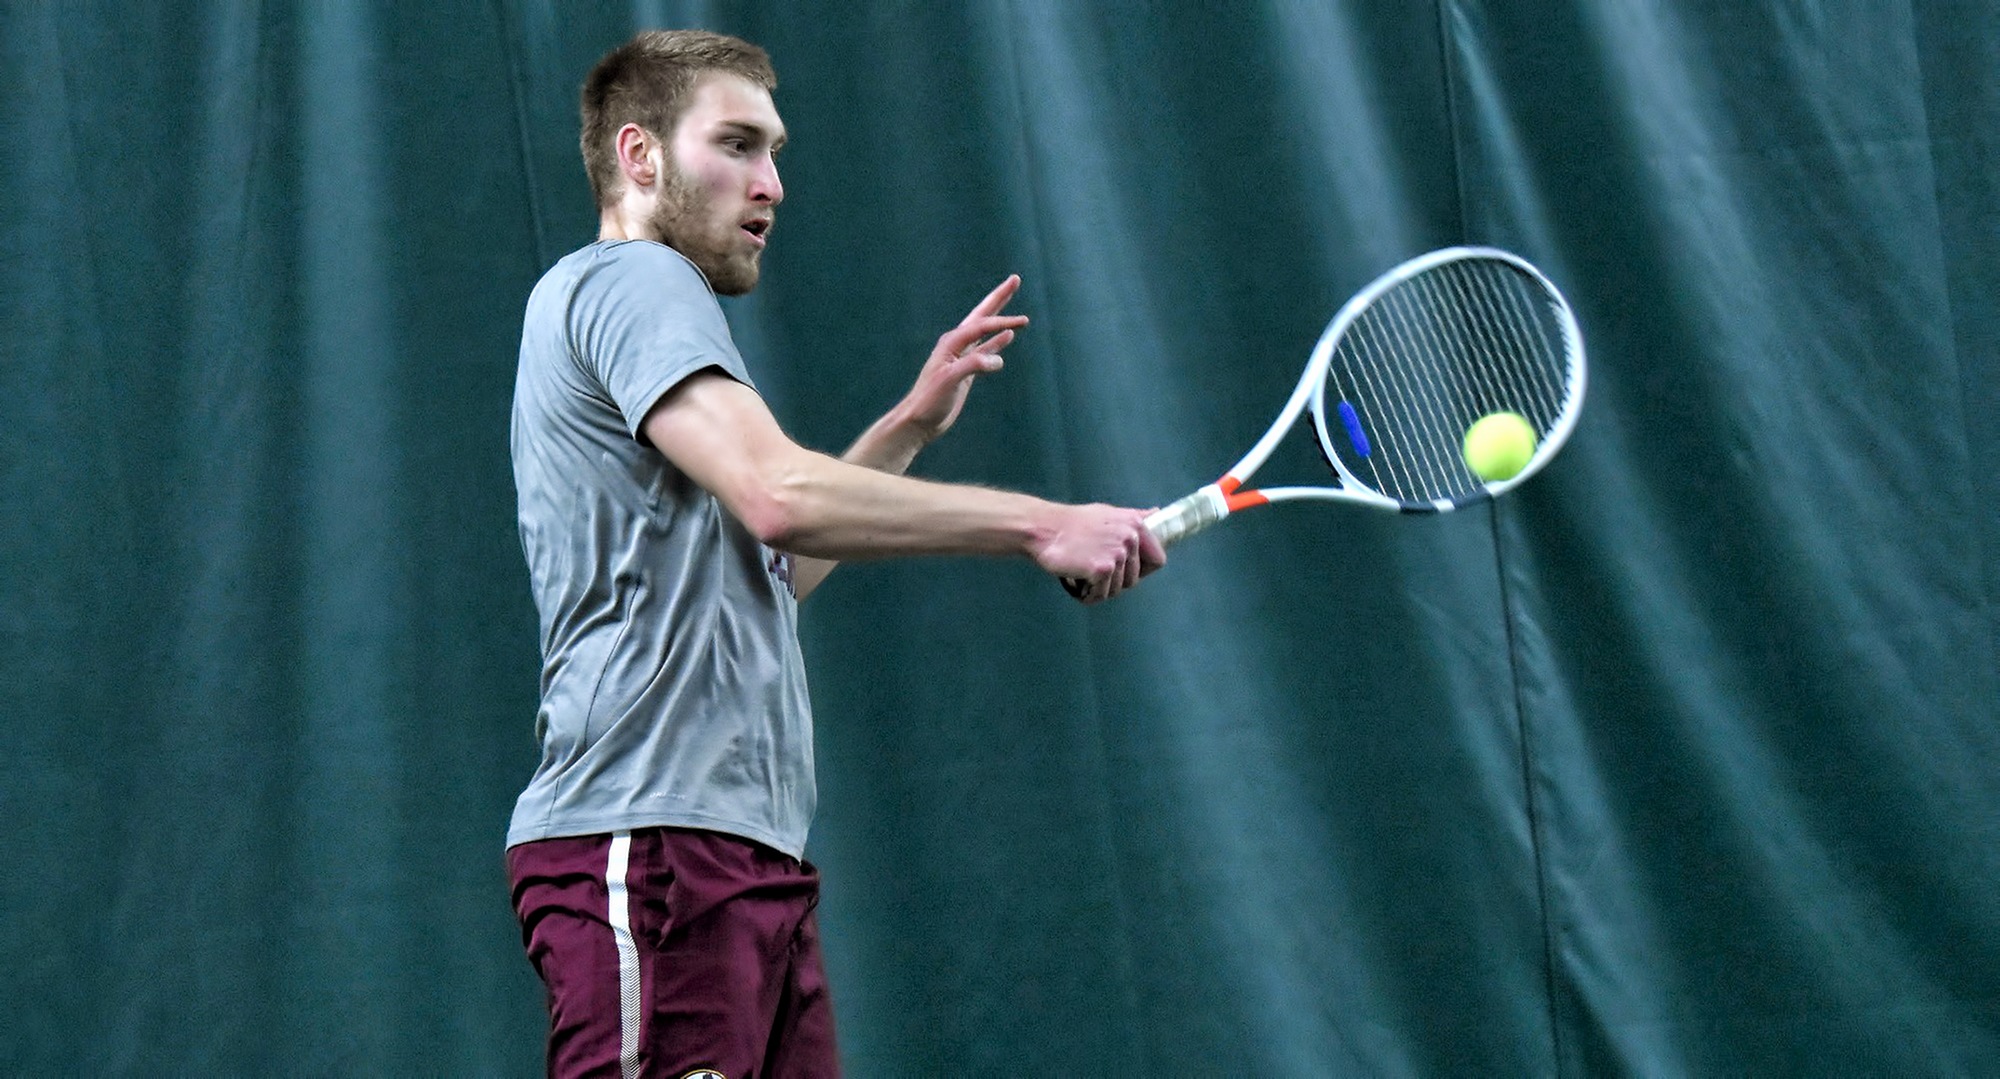 Junior Jake Peters posted a 6-2, 6-3 win at No.6 singles to clinch the team victory for the Cobbers' at Wis.-Superior.